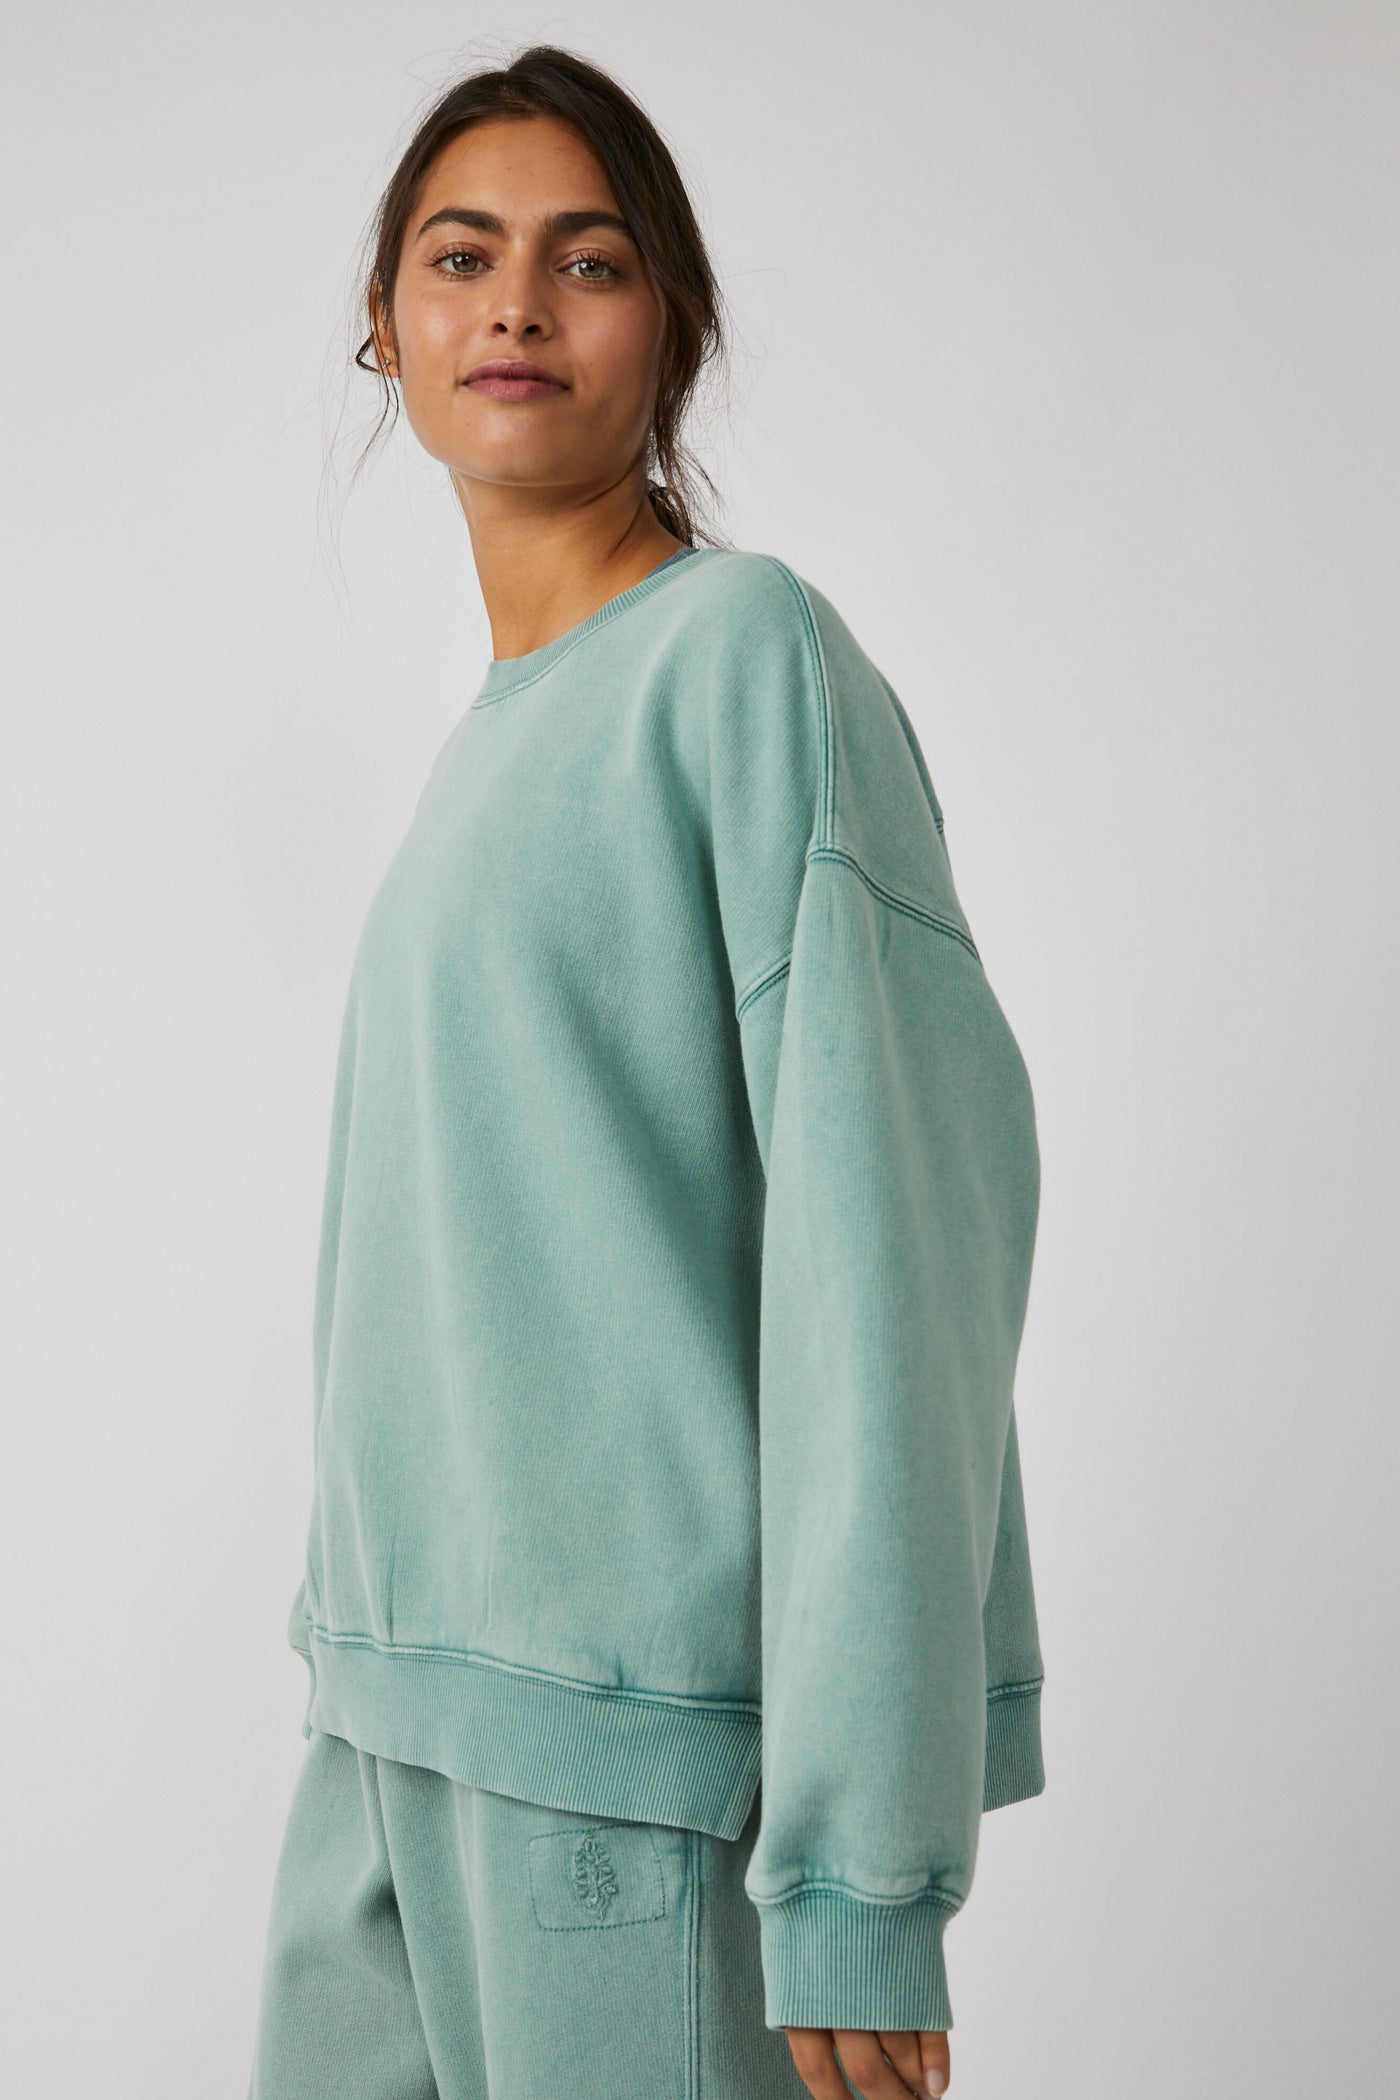 Free People All Star Pullover - Emerald